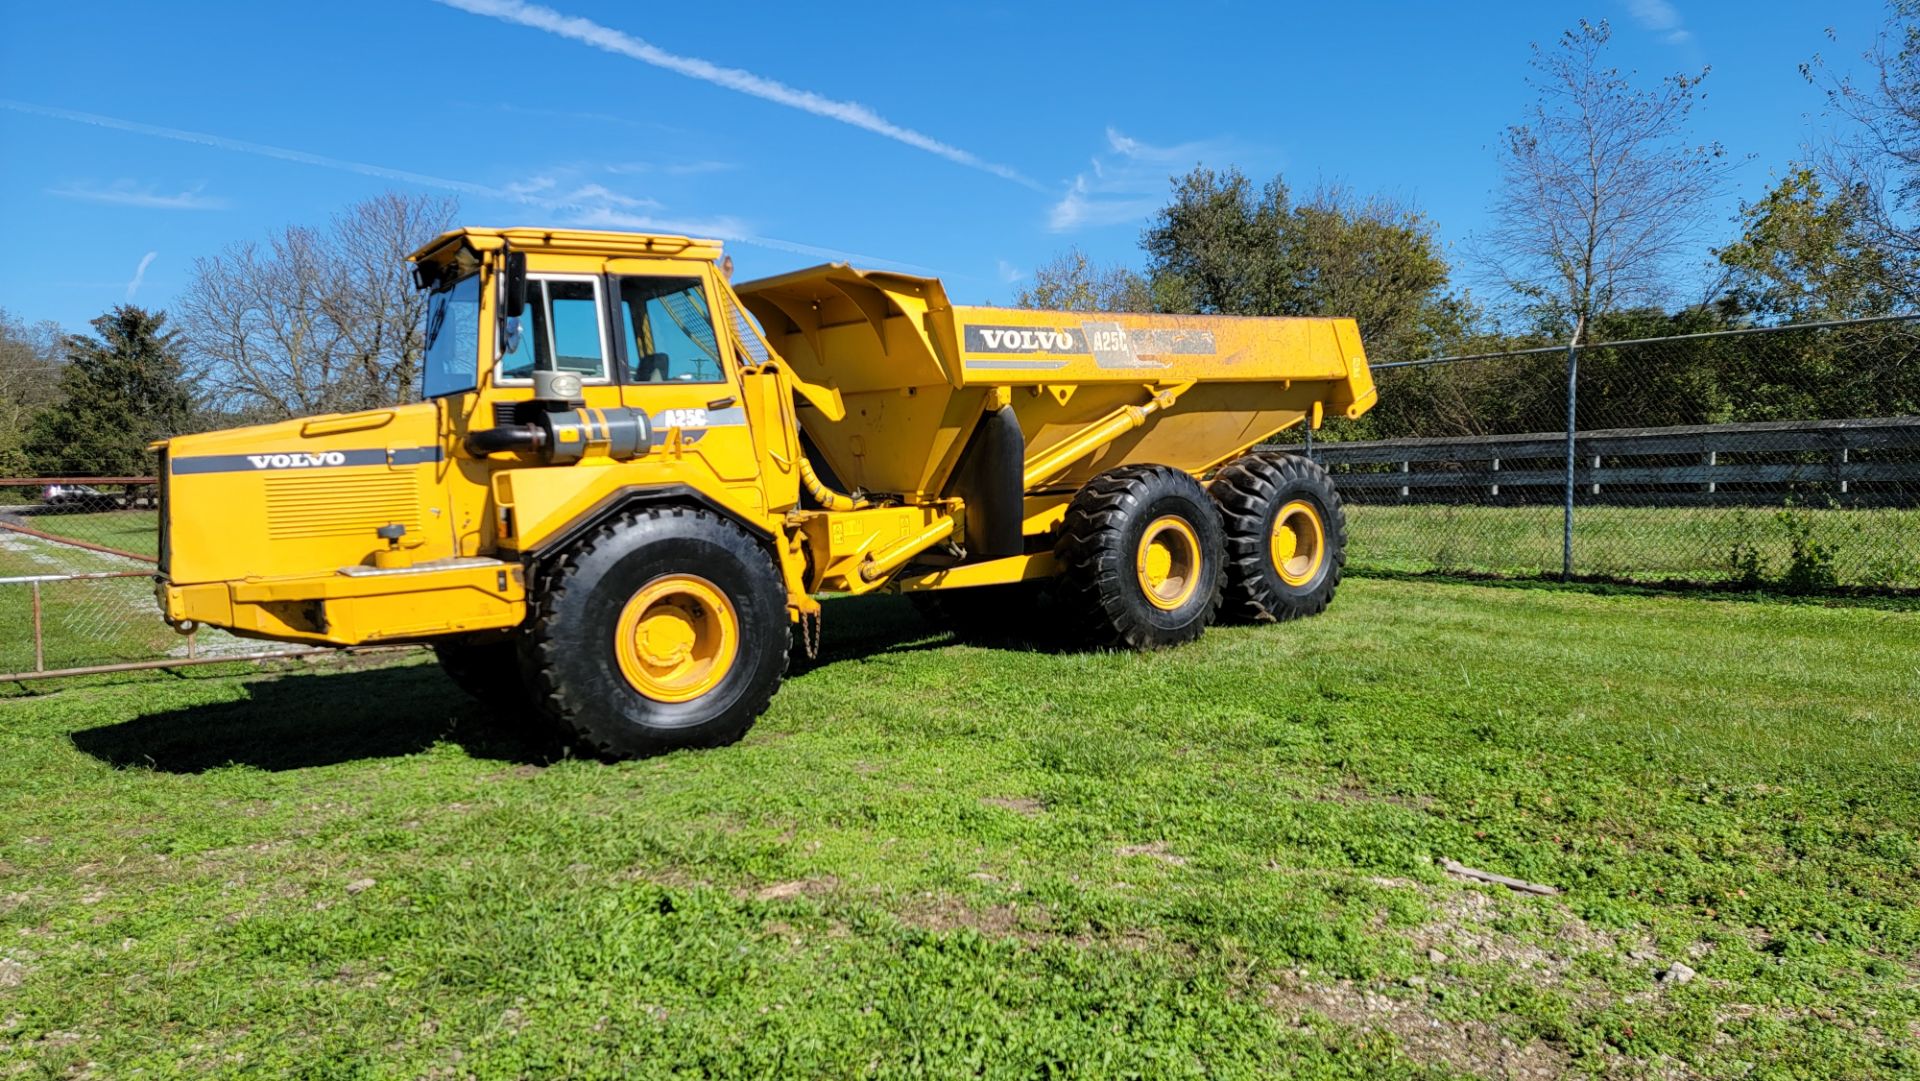 Volvo A25C 6x6 Offroad Dump Truck, 30,519 Miles, 12,411 Hours, s/n 5350V61011 - Image 2 of 34